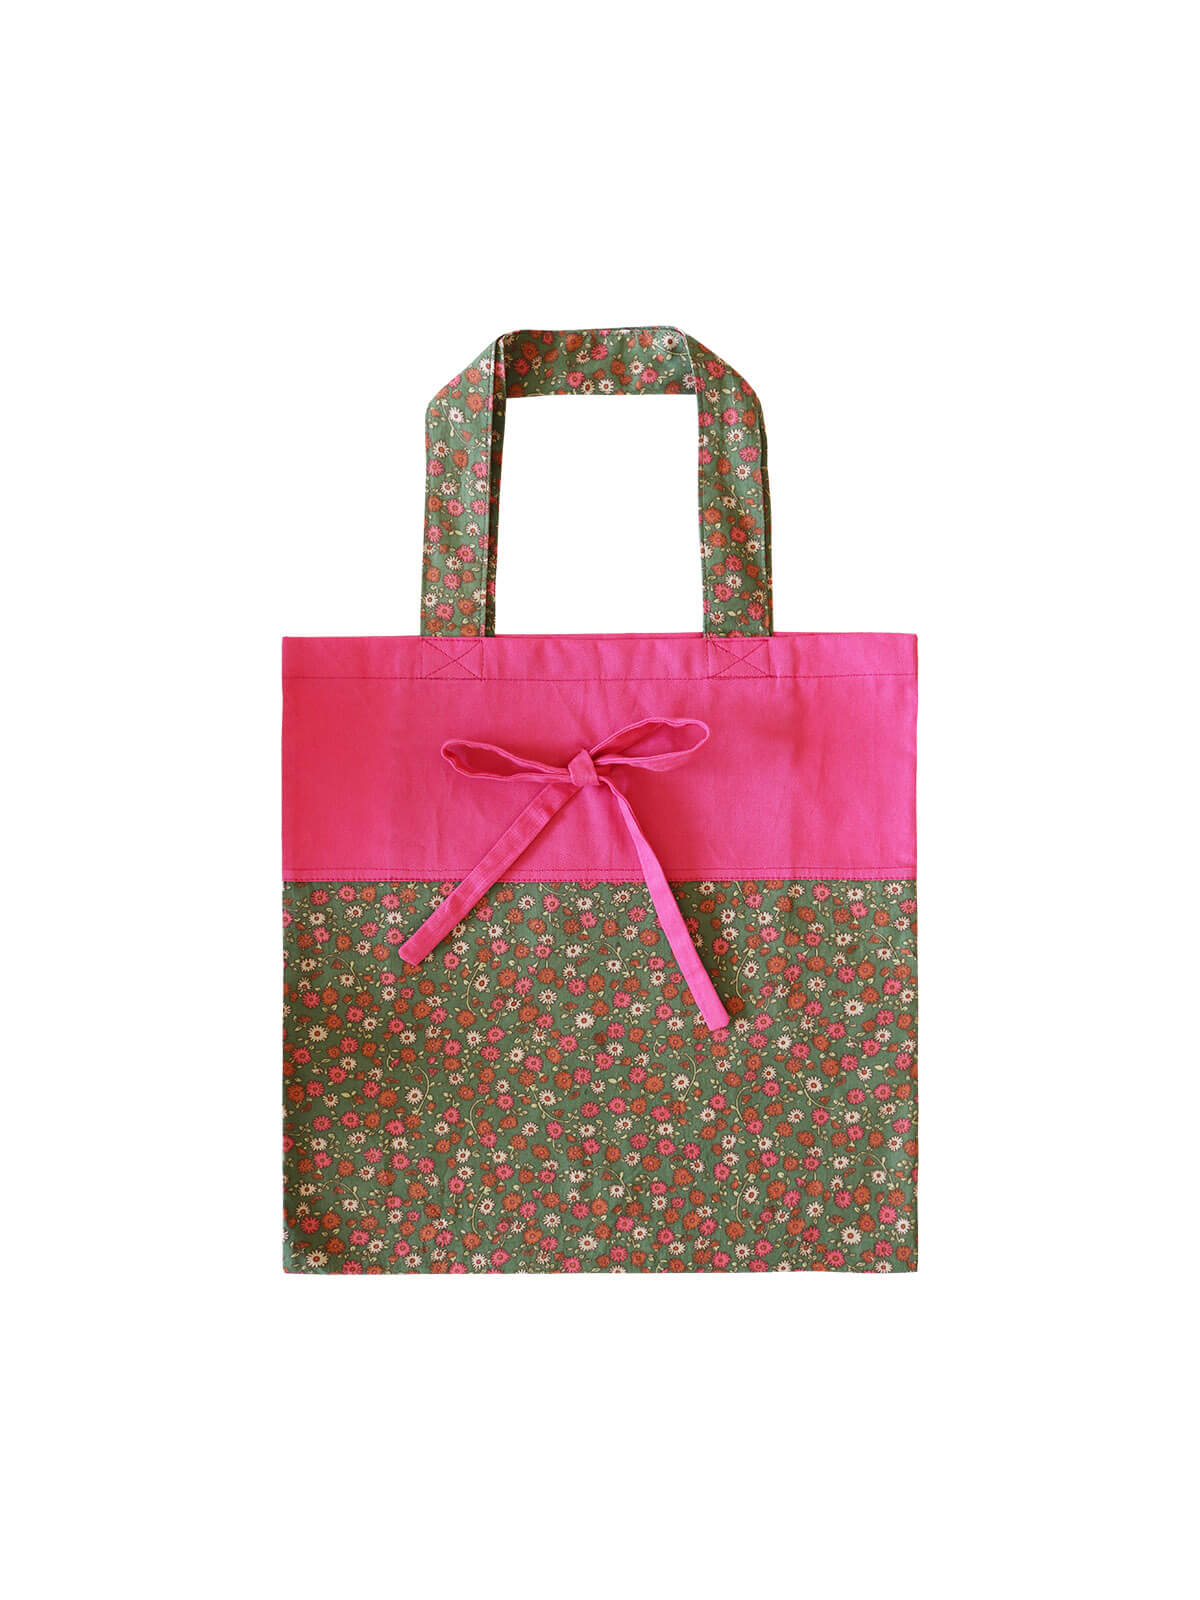 Pink/green foldable tote bag, upcycled cotton, Mitzie Mee Shop